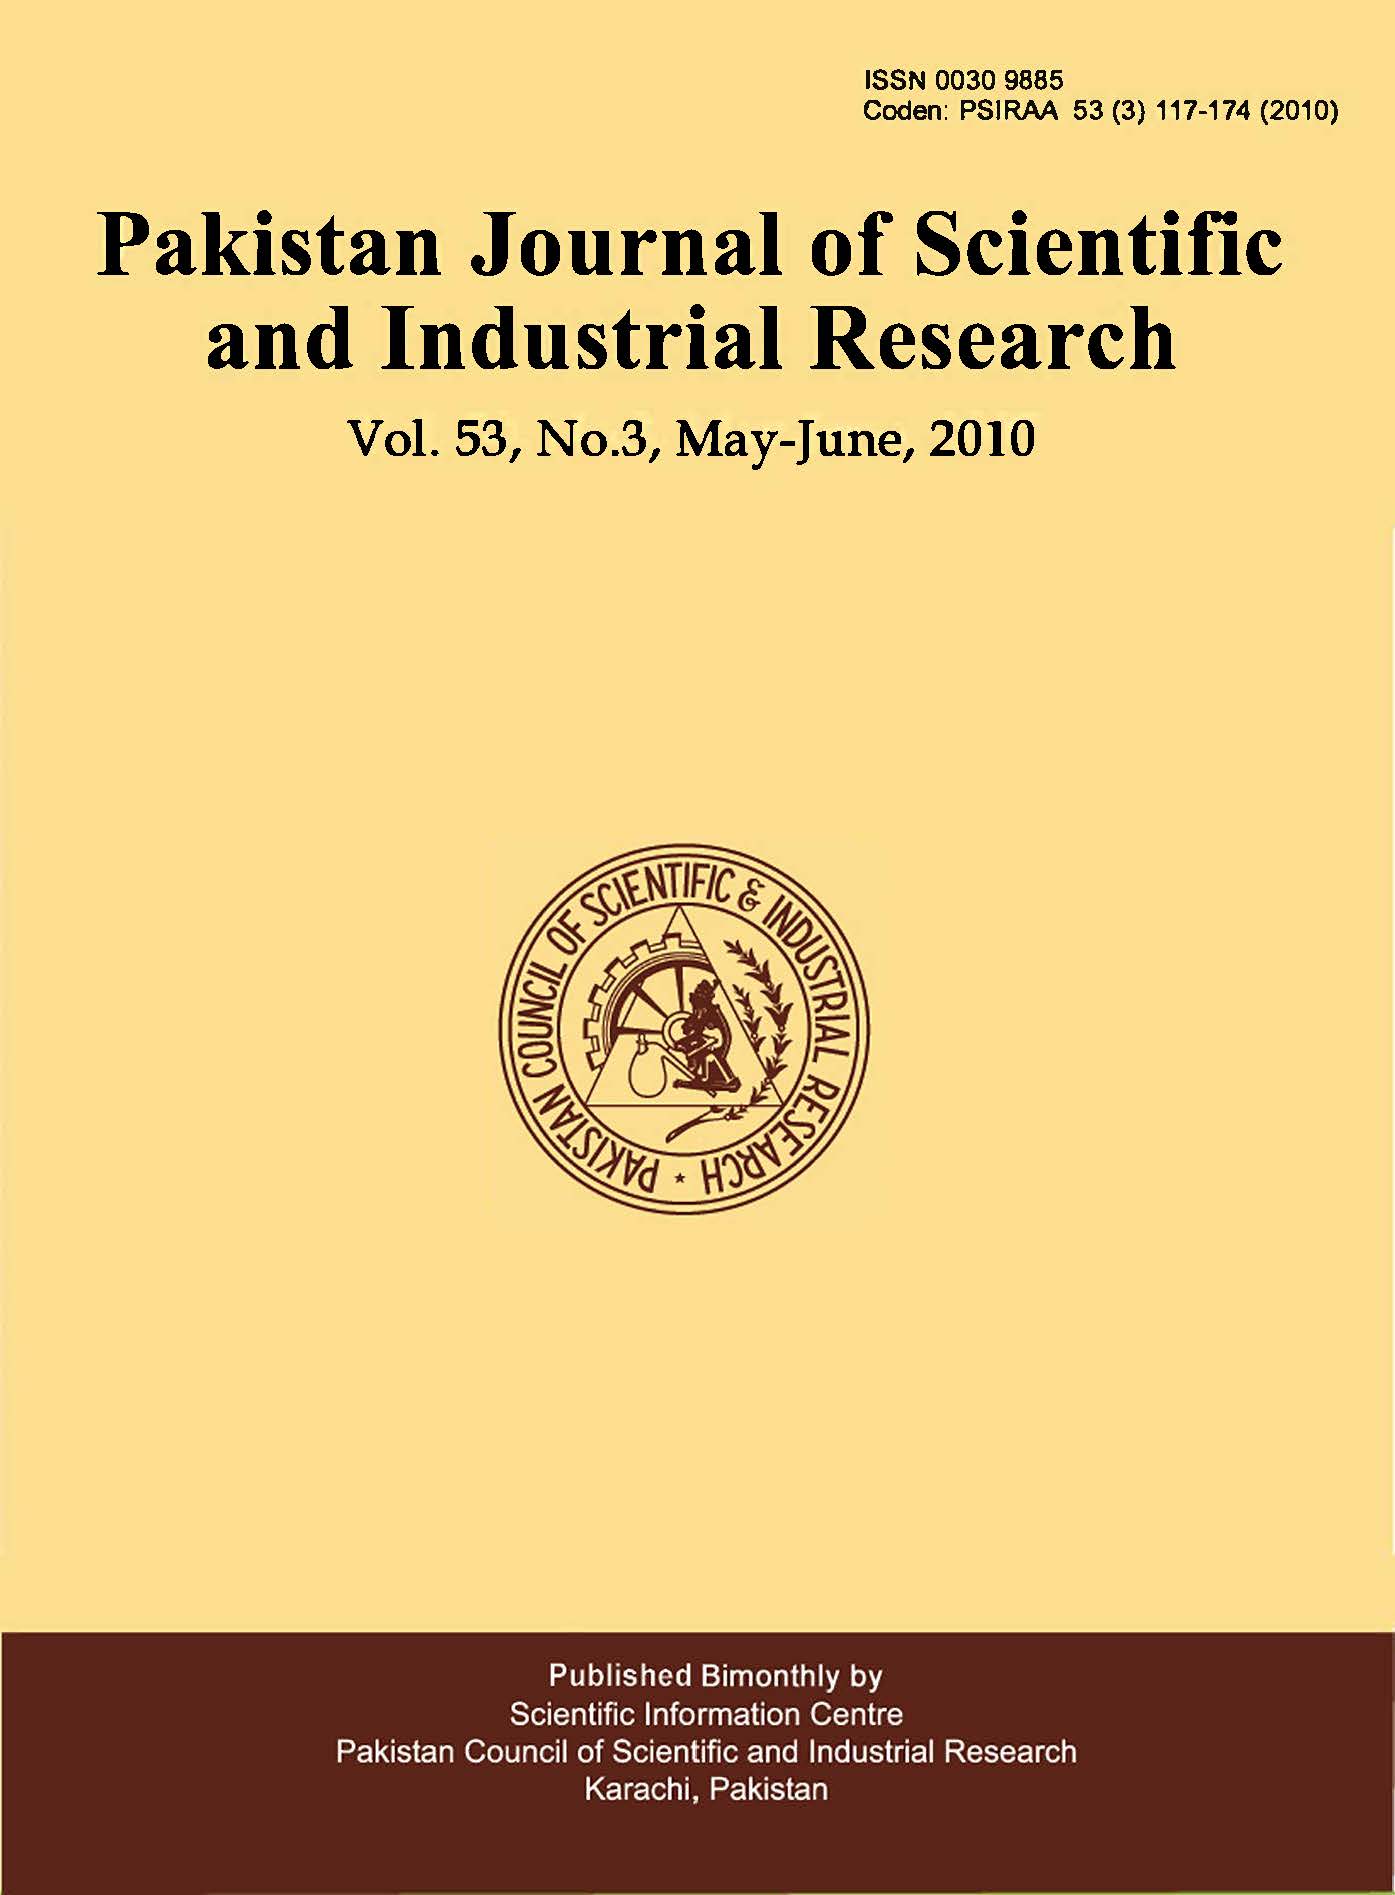 					View Vol. 53 No. 3 (2010): Pakistan Journal of Scientific and Industrial Research
				